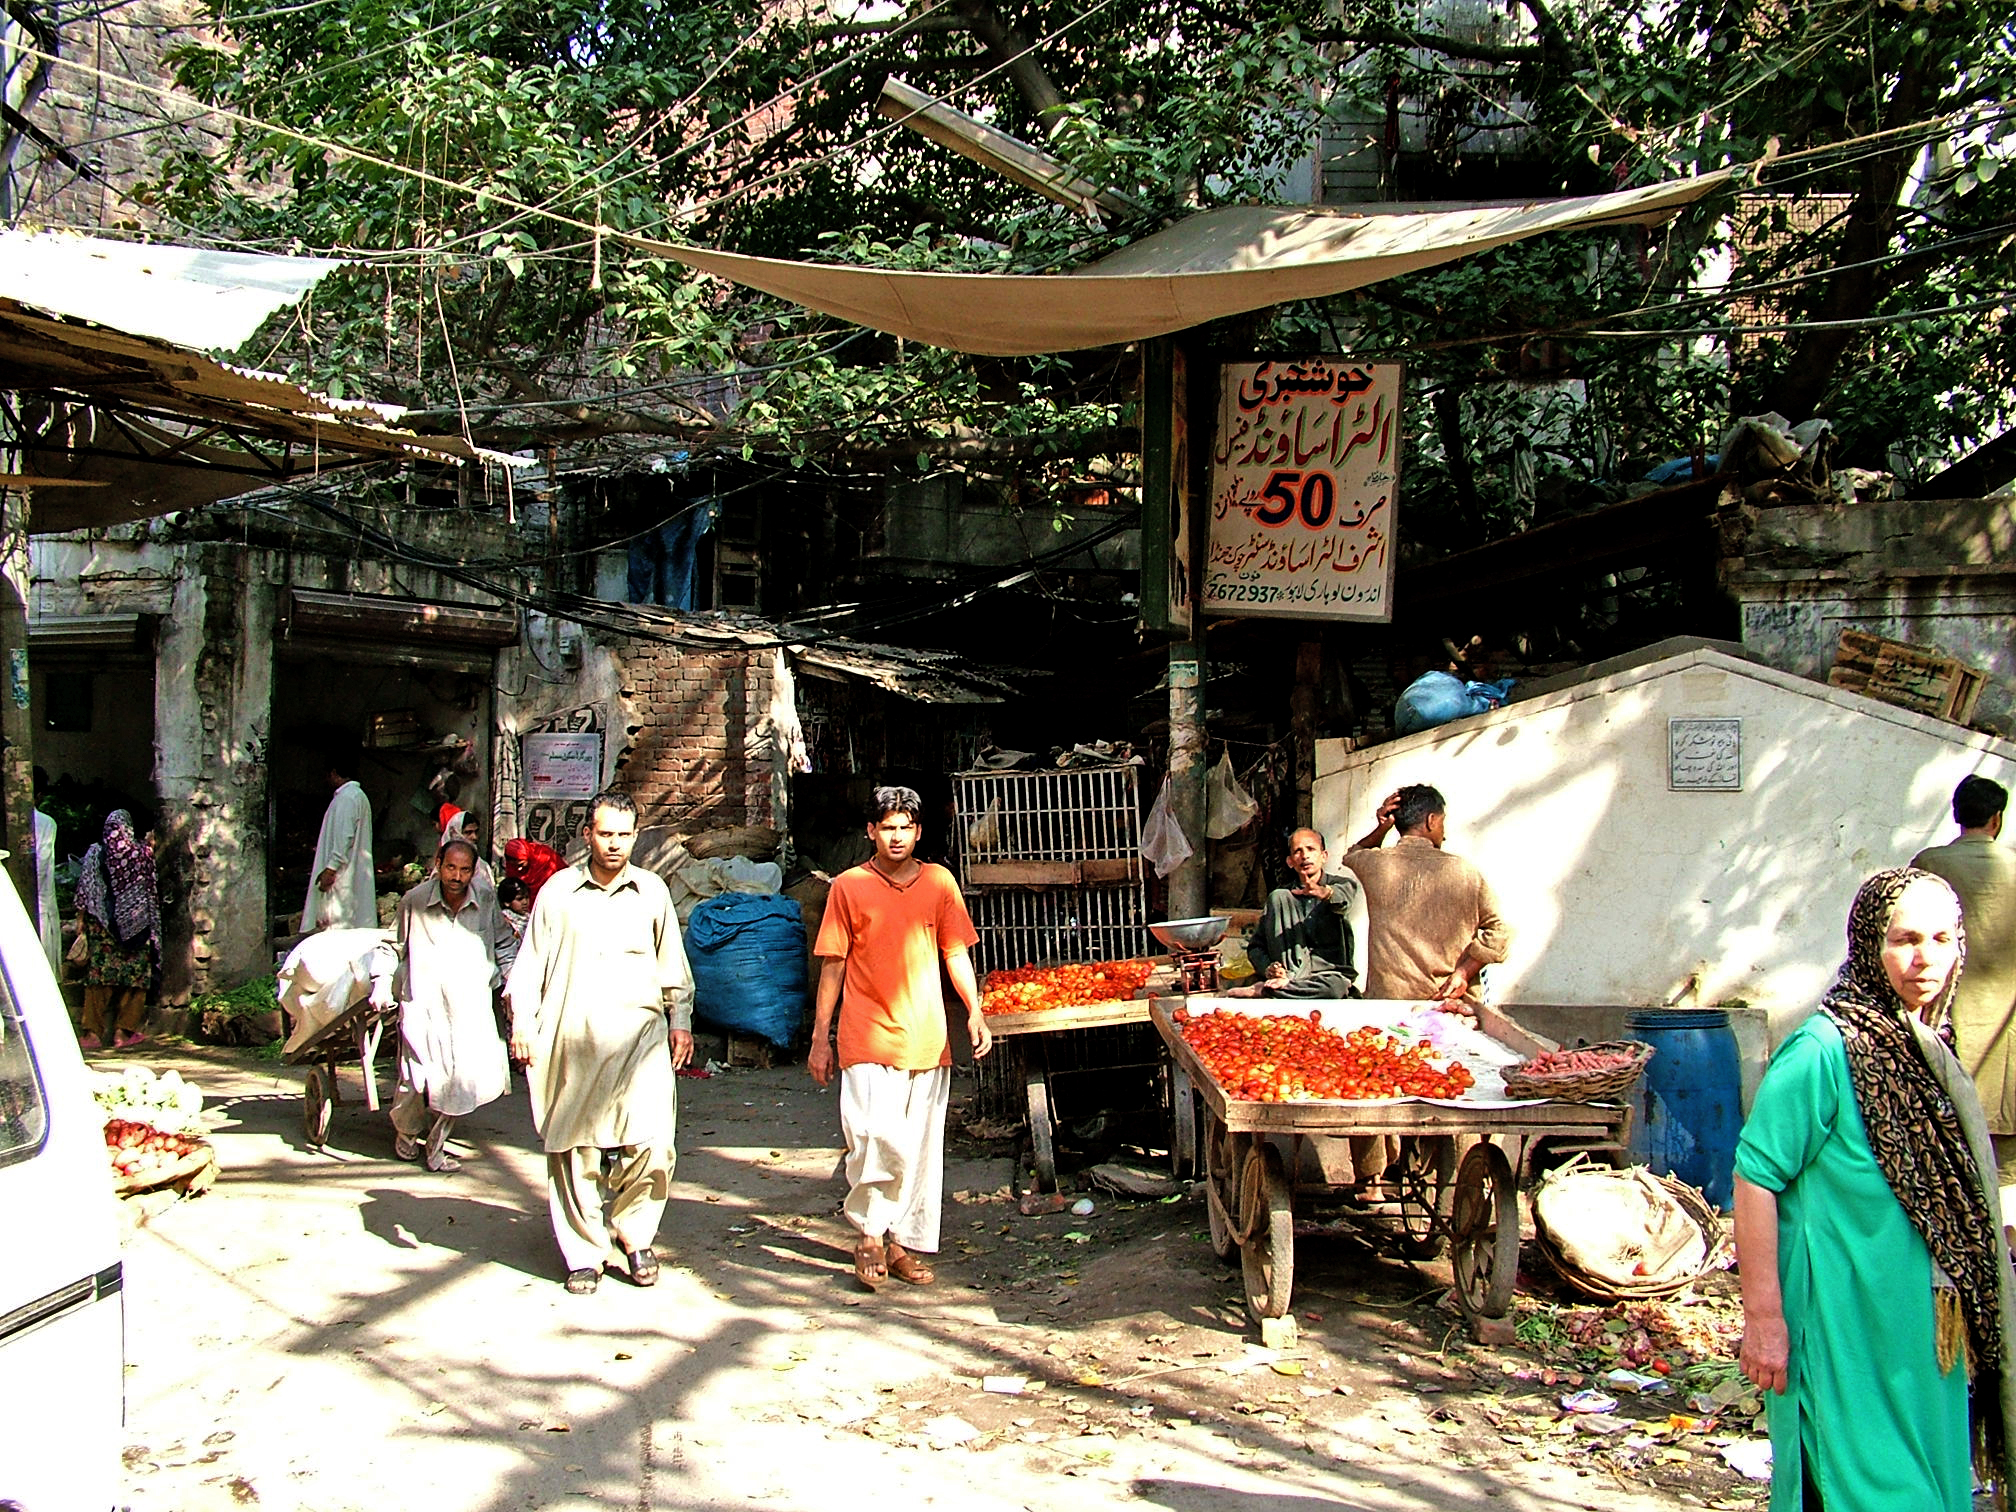 several men walking around an outdoor market selling items